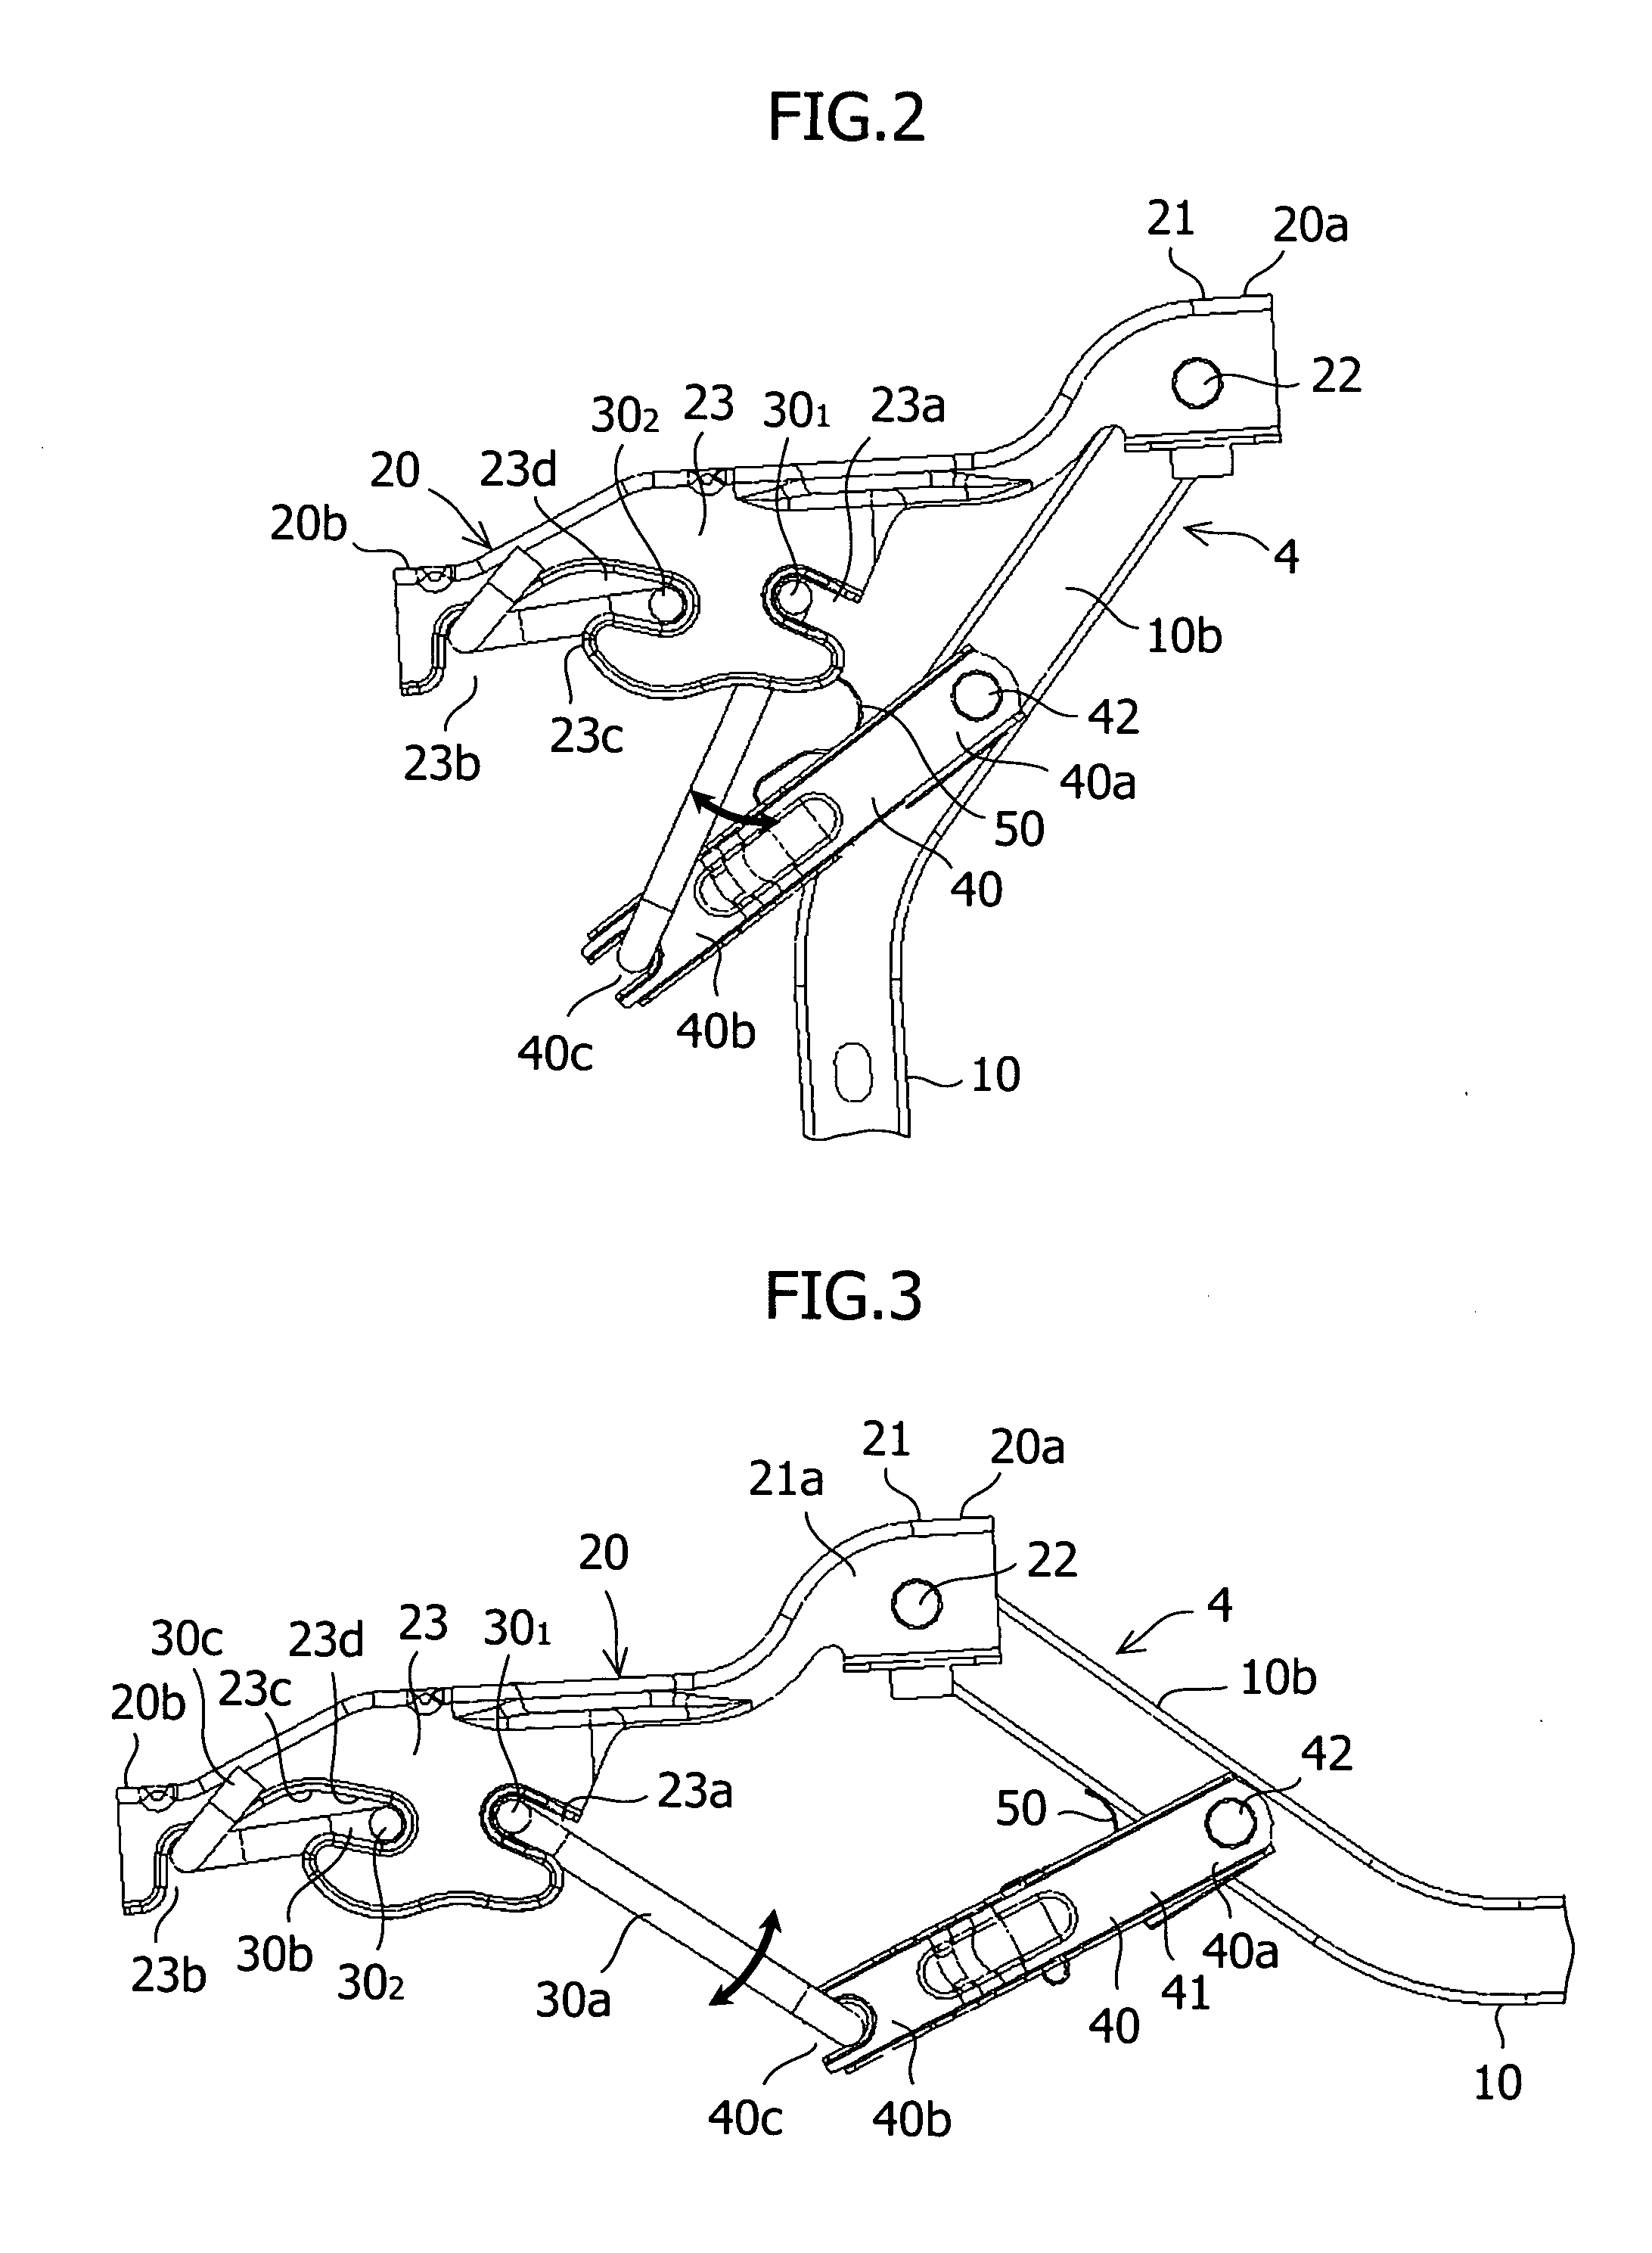 Opening and closing device for automobile trunk lid